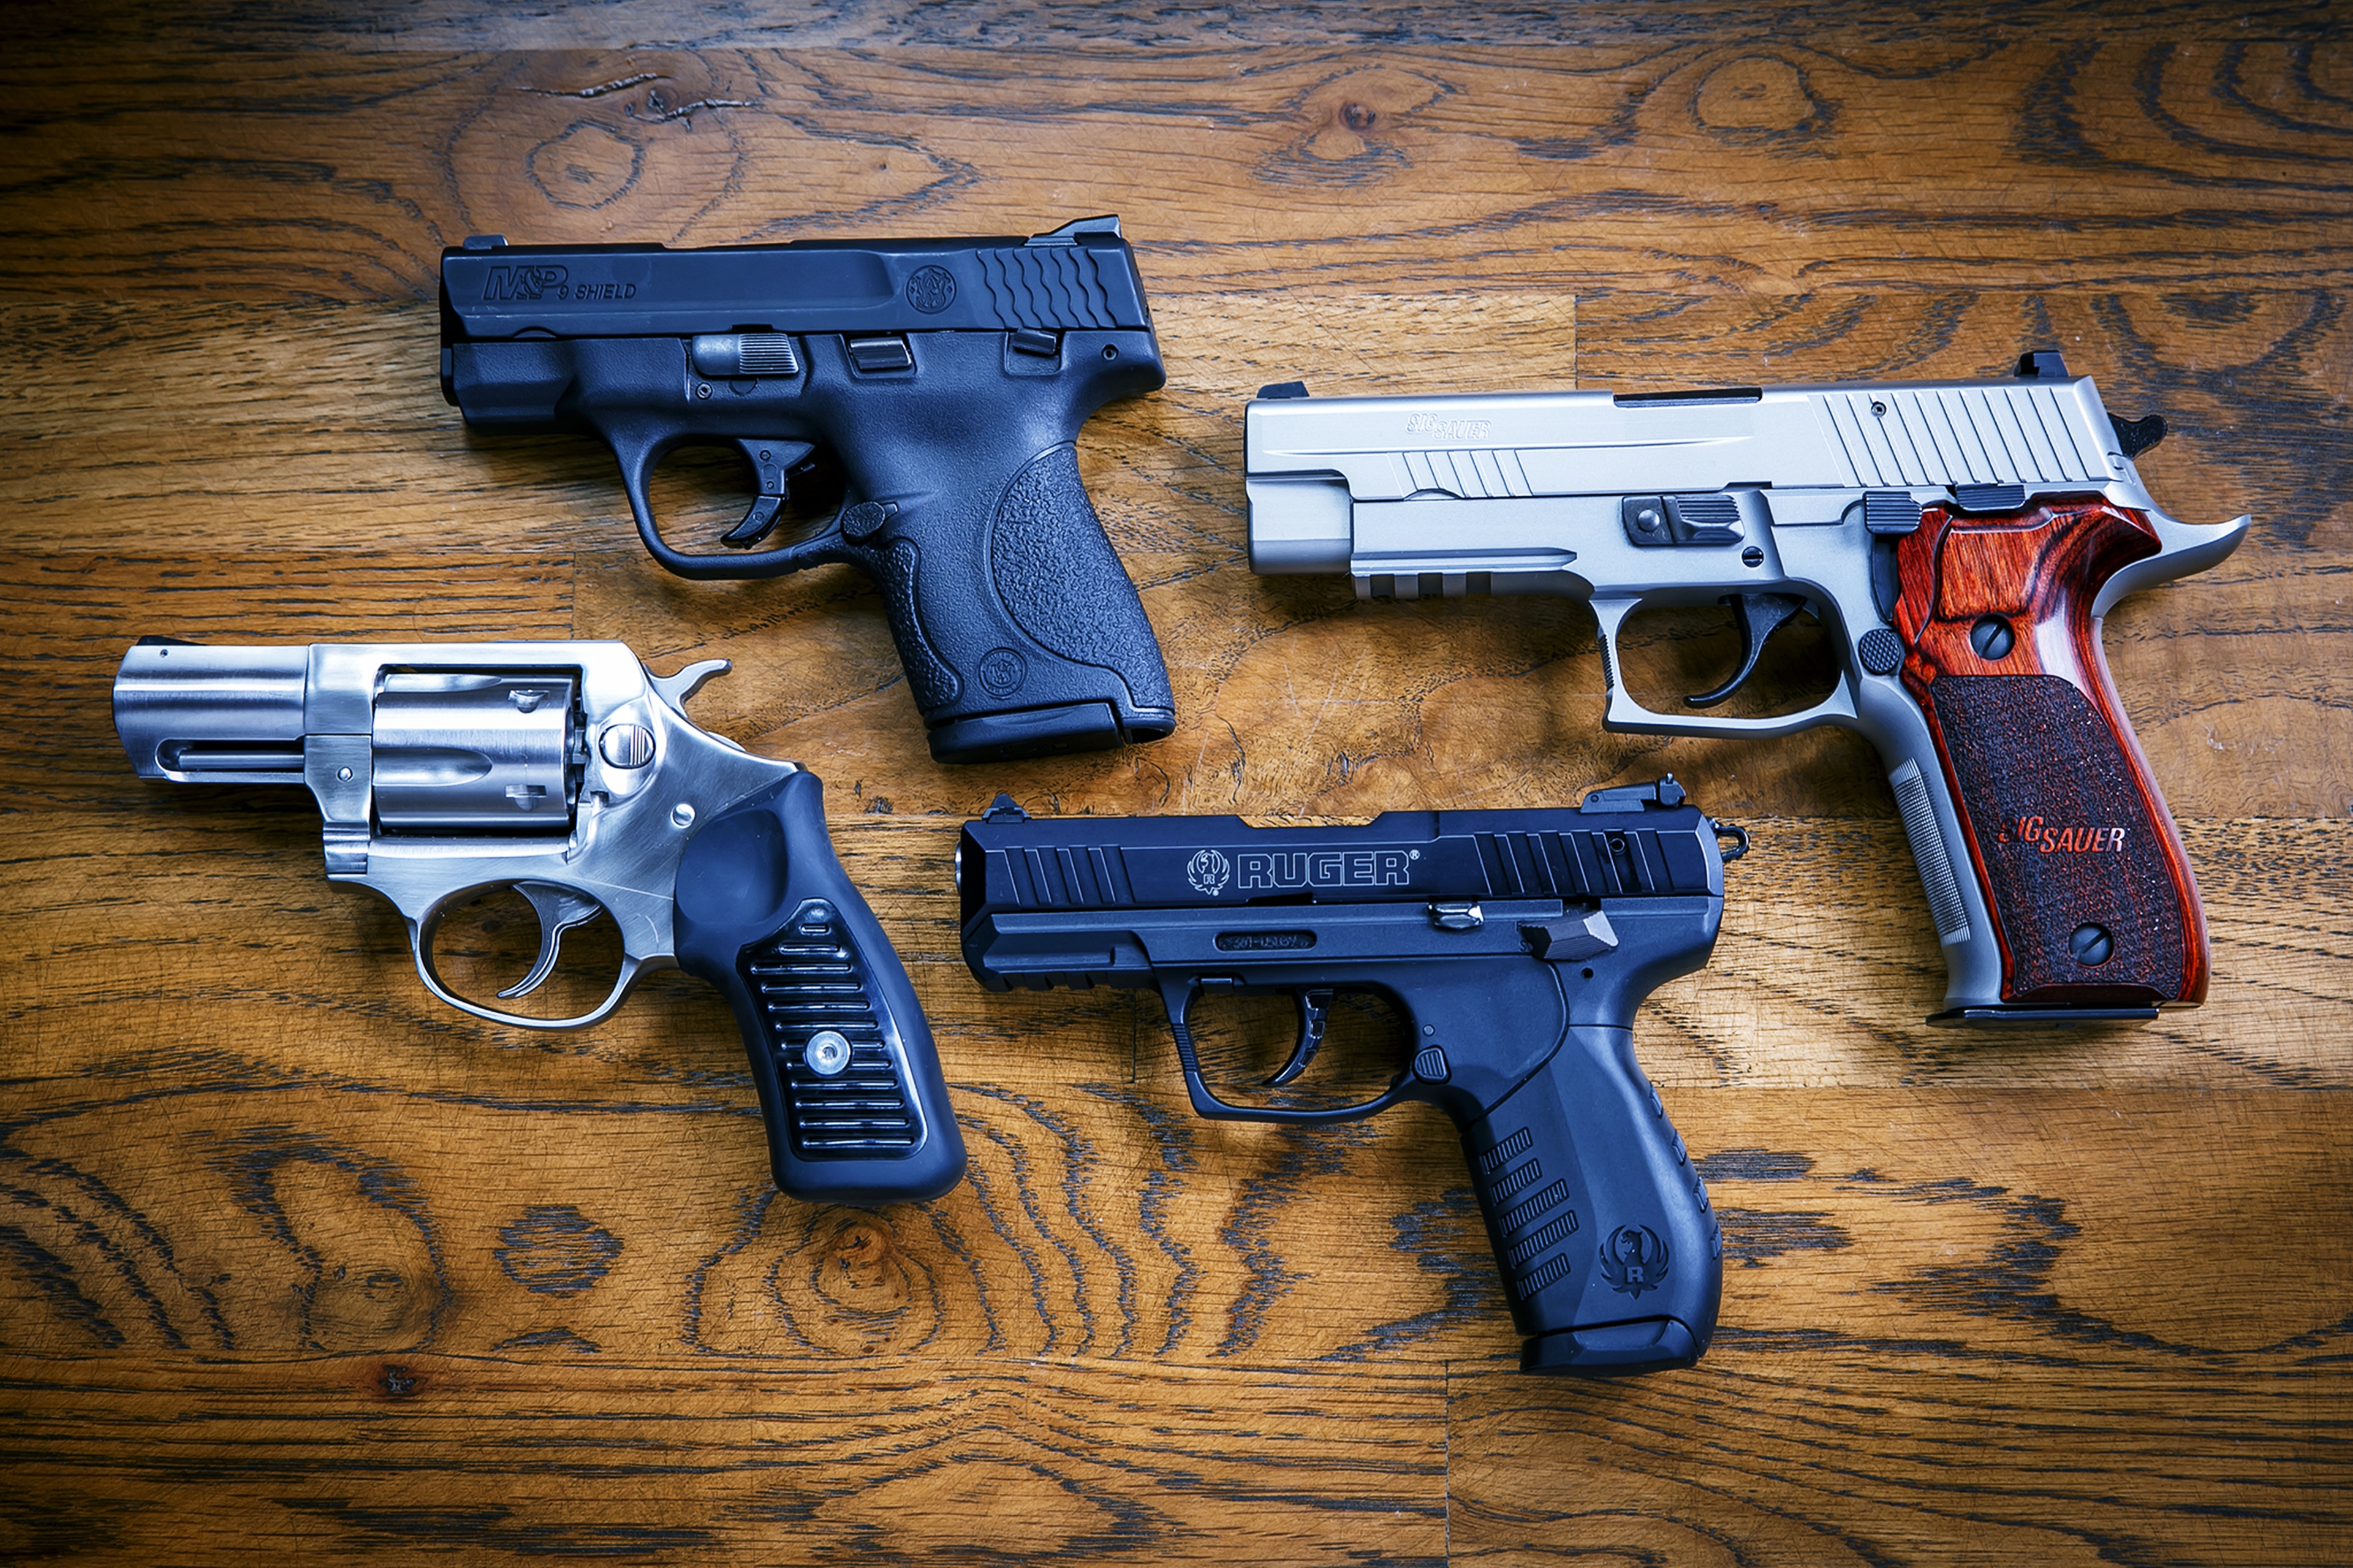 police, pistol, weapons, ruger, smith & wesson